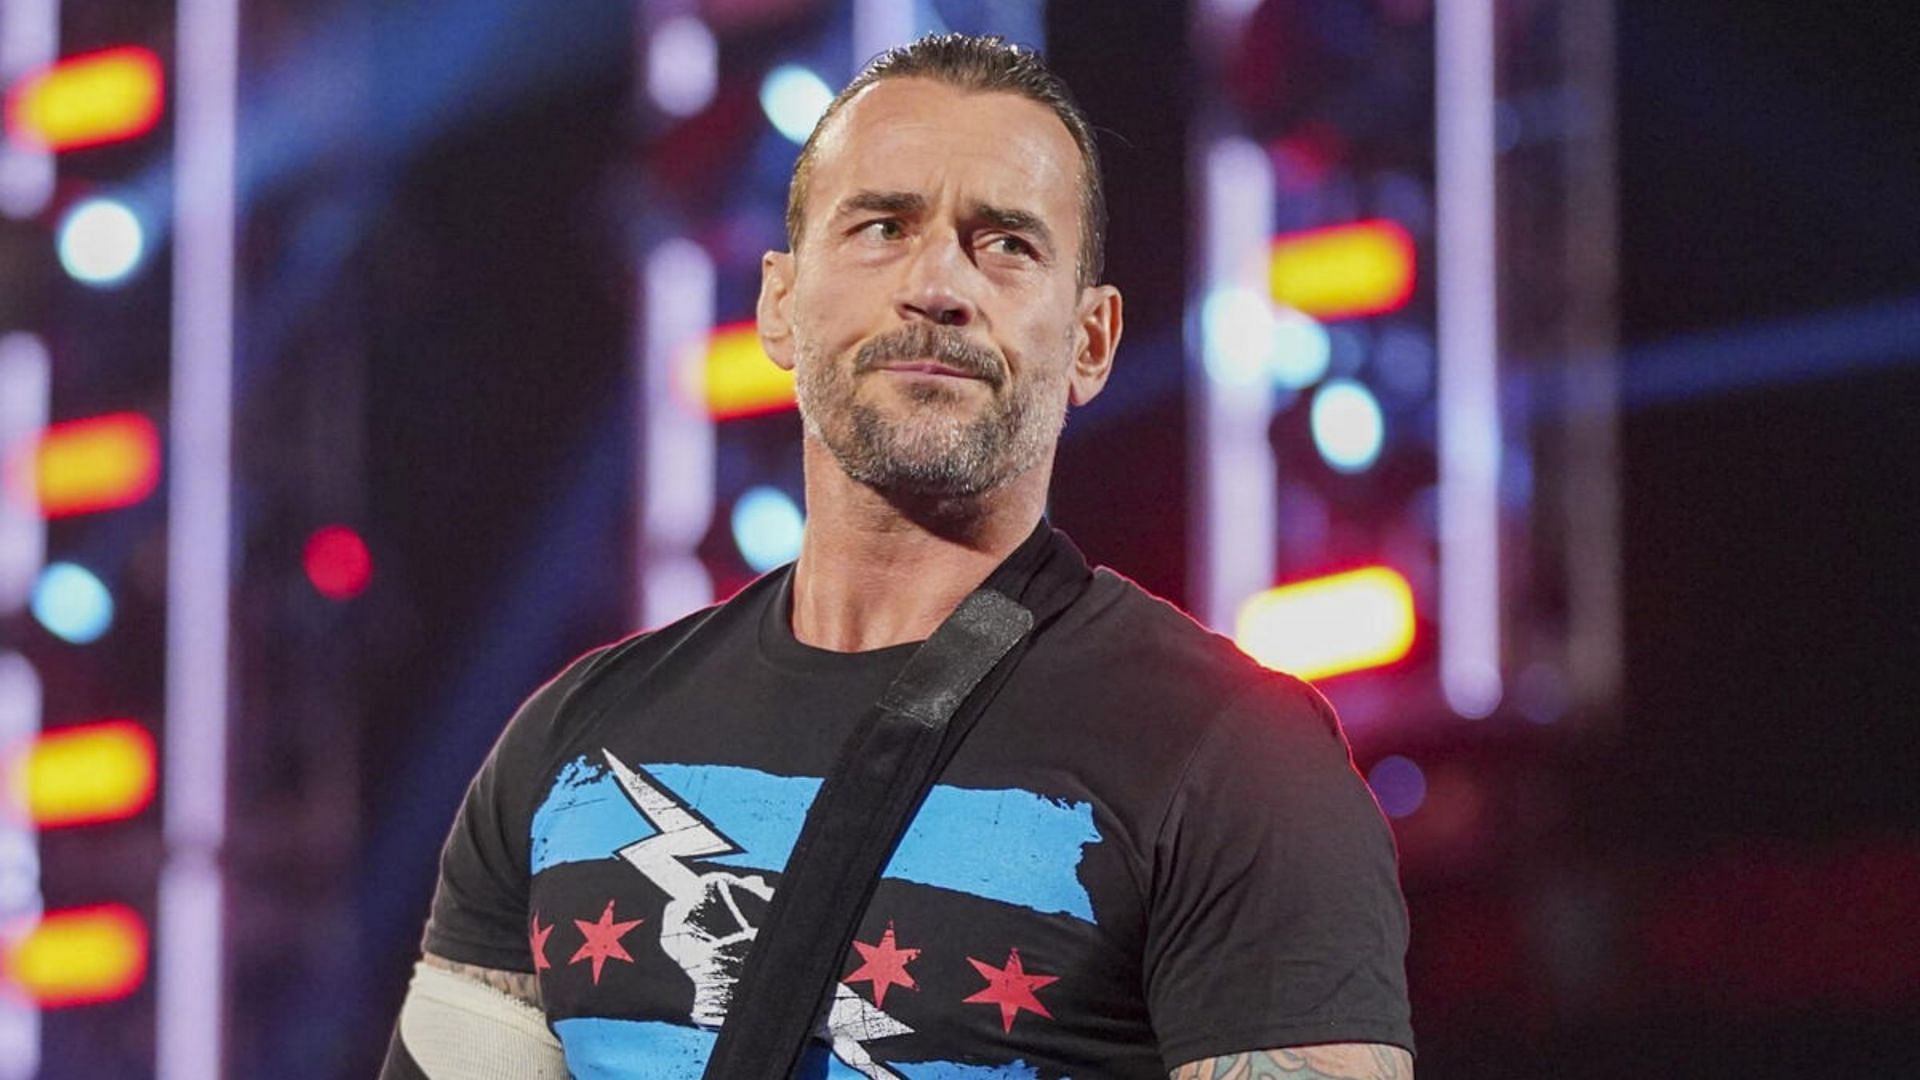 CM Punk suffered an injury at WWE Royal Rumble